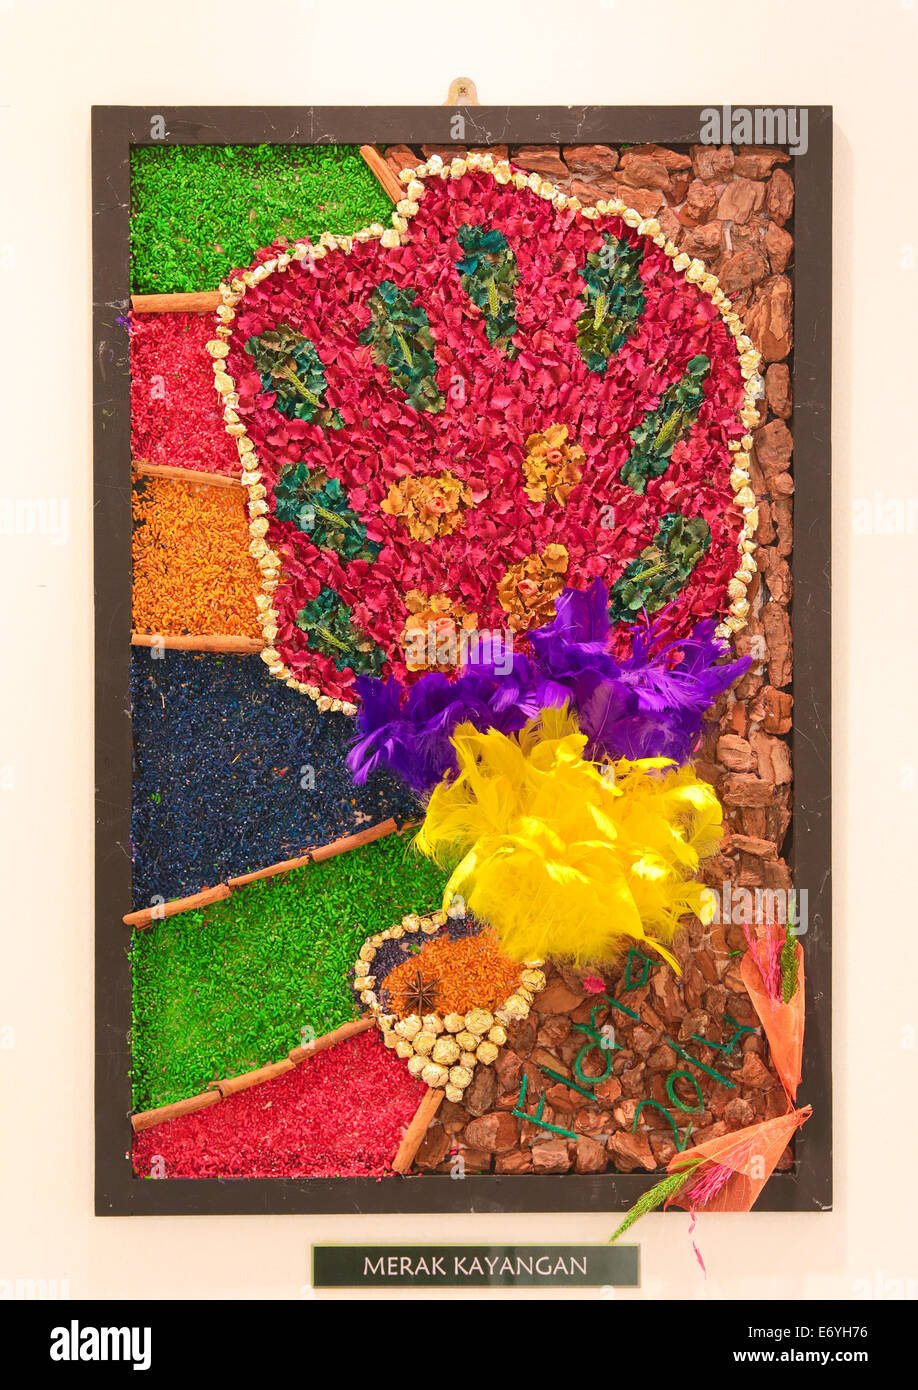 Picture made of nature elements such as flower and beans at FLORIA event held in Putrajaya, Malaysia Stock Photo